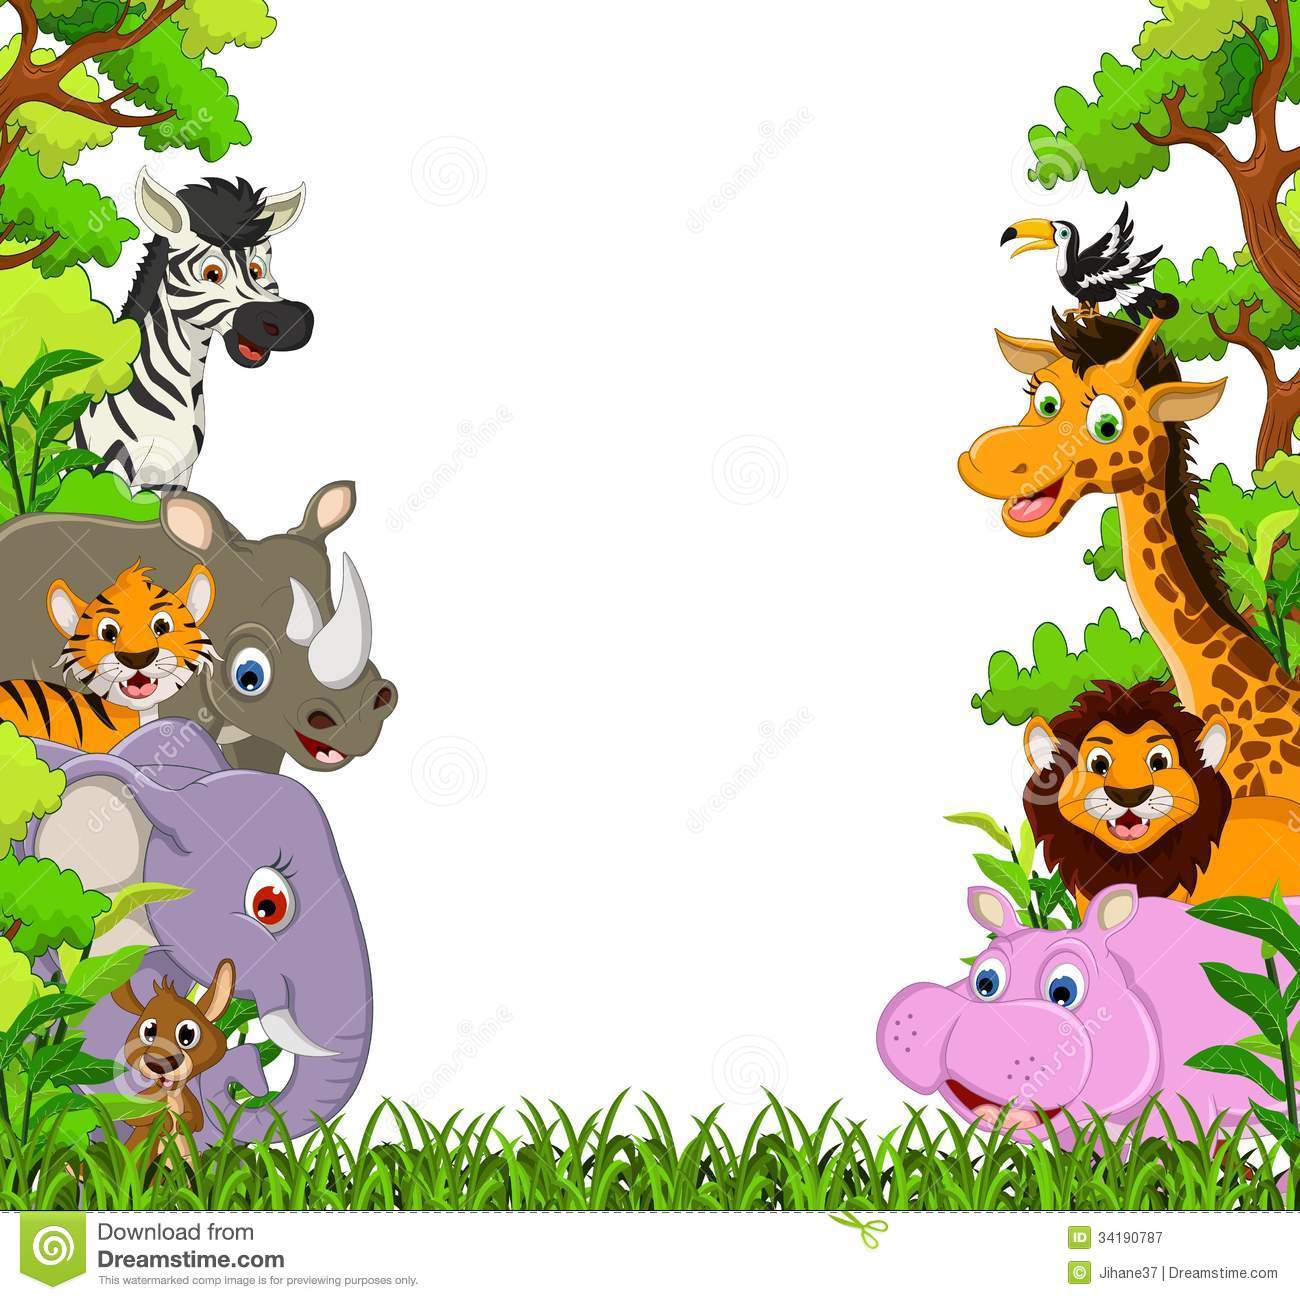 Cute Animal Cartoon With Tropical Forest Background Royalty Free Stock    